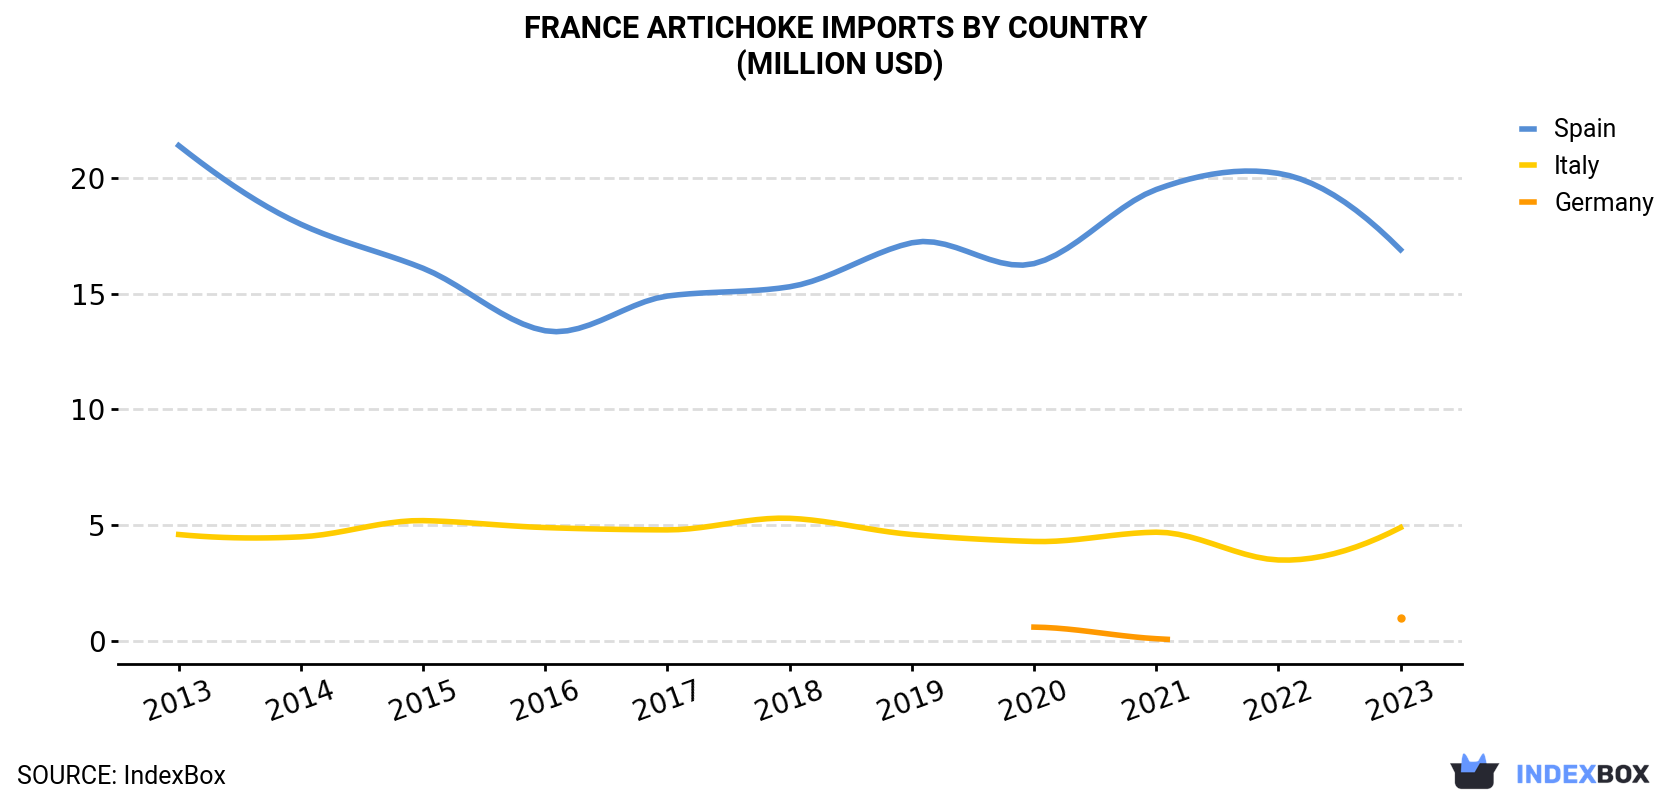 France Artichoke Imports By Country (Million USD)